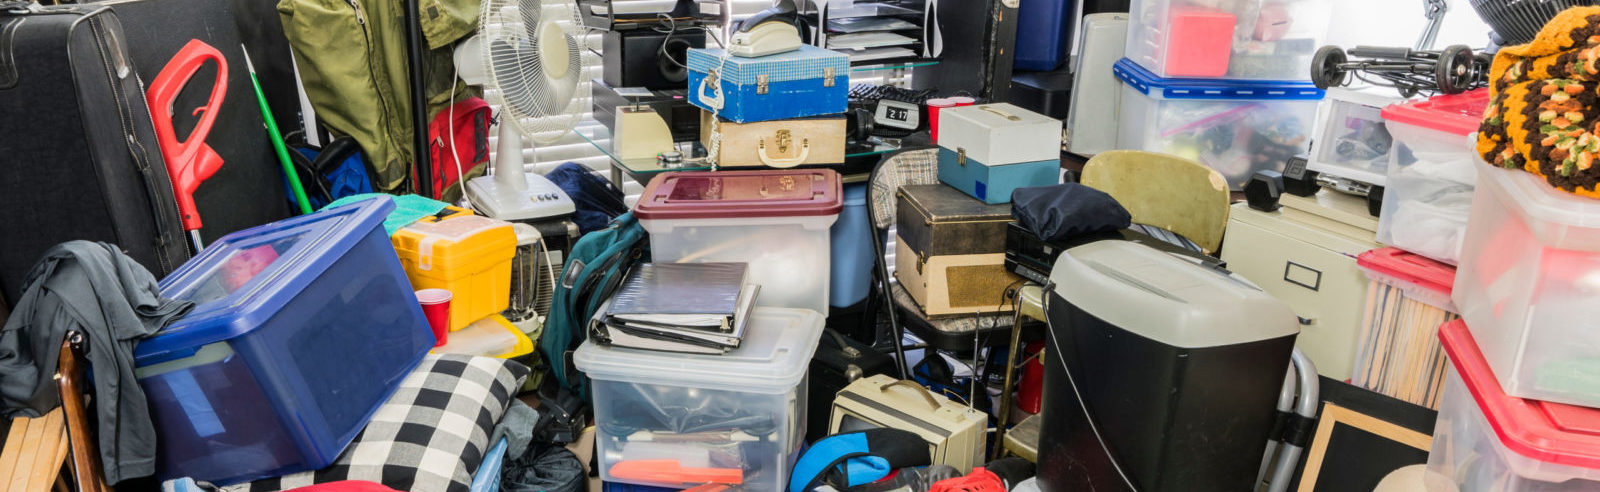 a cluttered space in need of a cleanout service